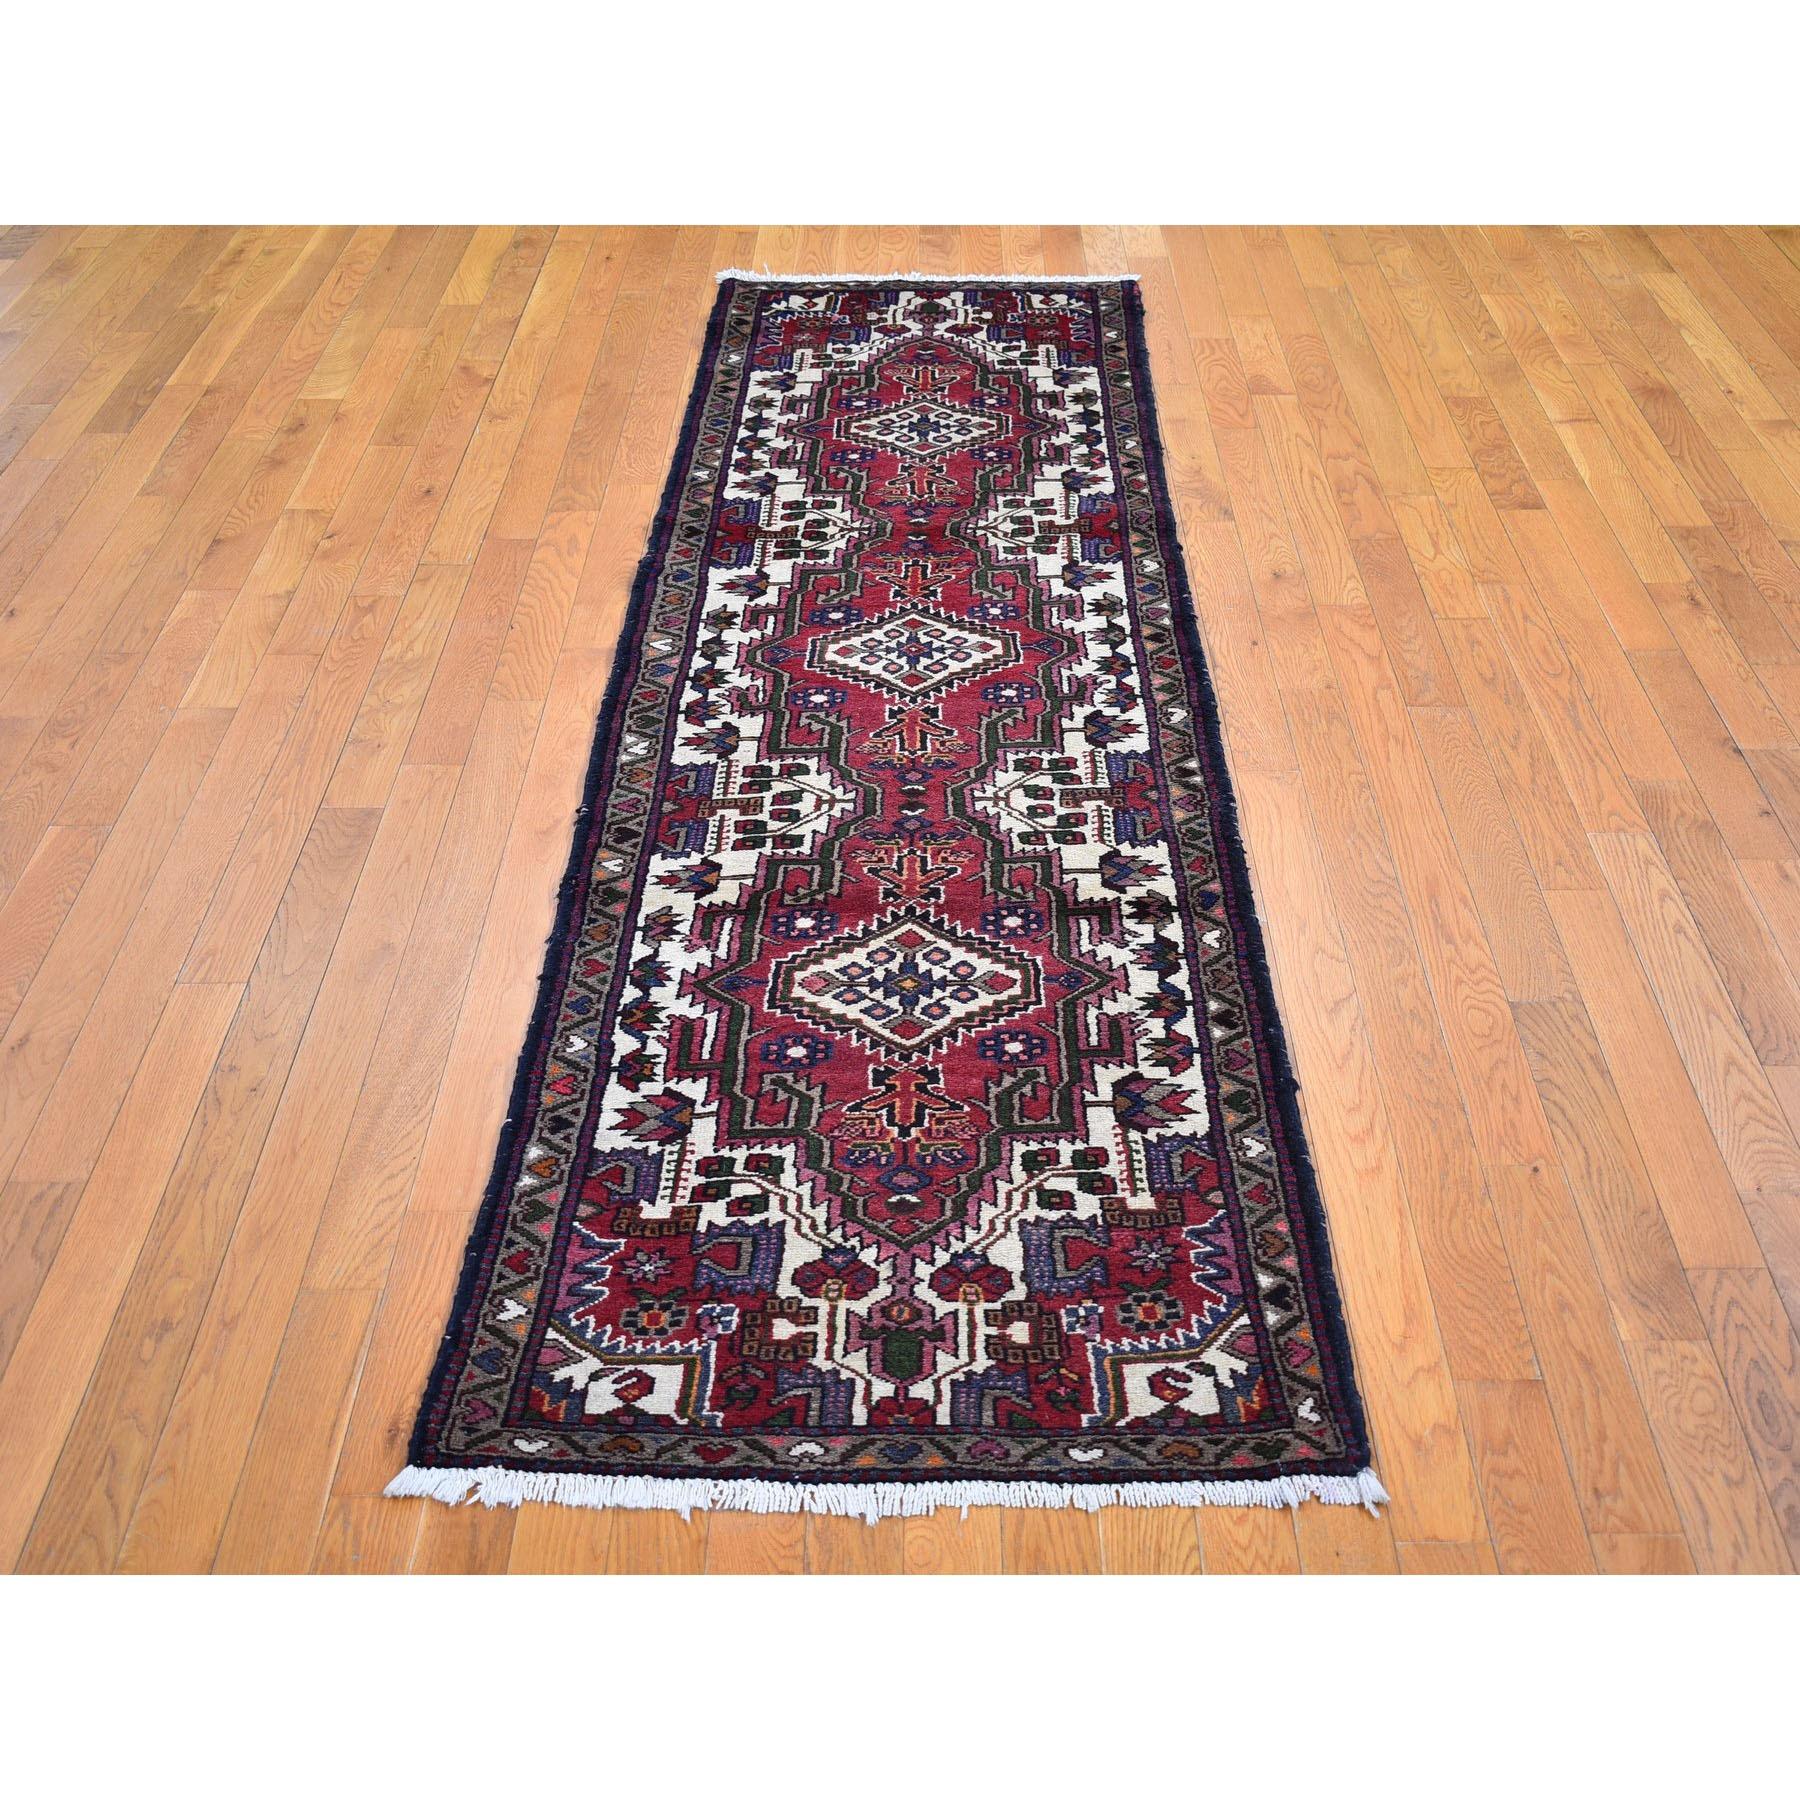 This fabulous hand-knotted carpet has been created and designed for extra strength and durability. This rug has been handcrafted for weeks in the traditional method that is used to make
Exact Rug Size in Feet and Inches : 2'8